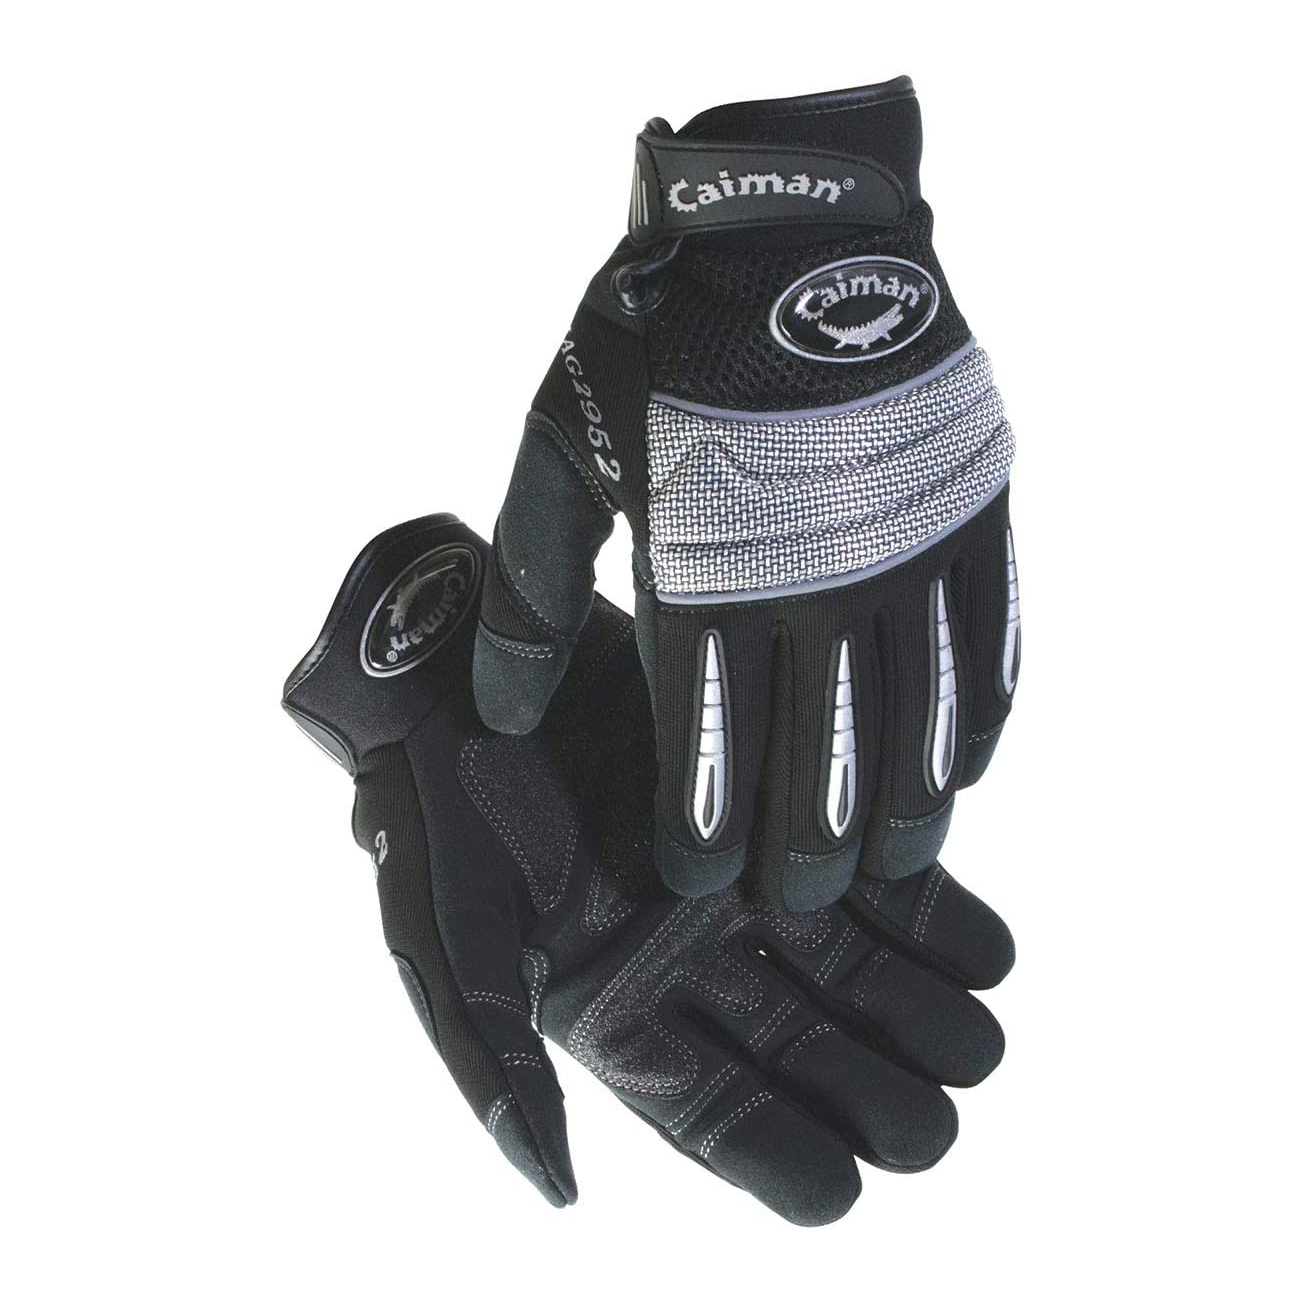 https://storage.googleapis.com/product-images_blue-collar-workwear/2020-10-07T08:18:32.227Z-Caiman%20Synthetic%20General%20Work%20Gloves.png